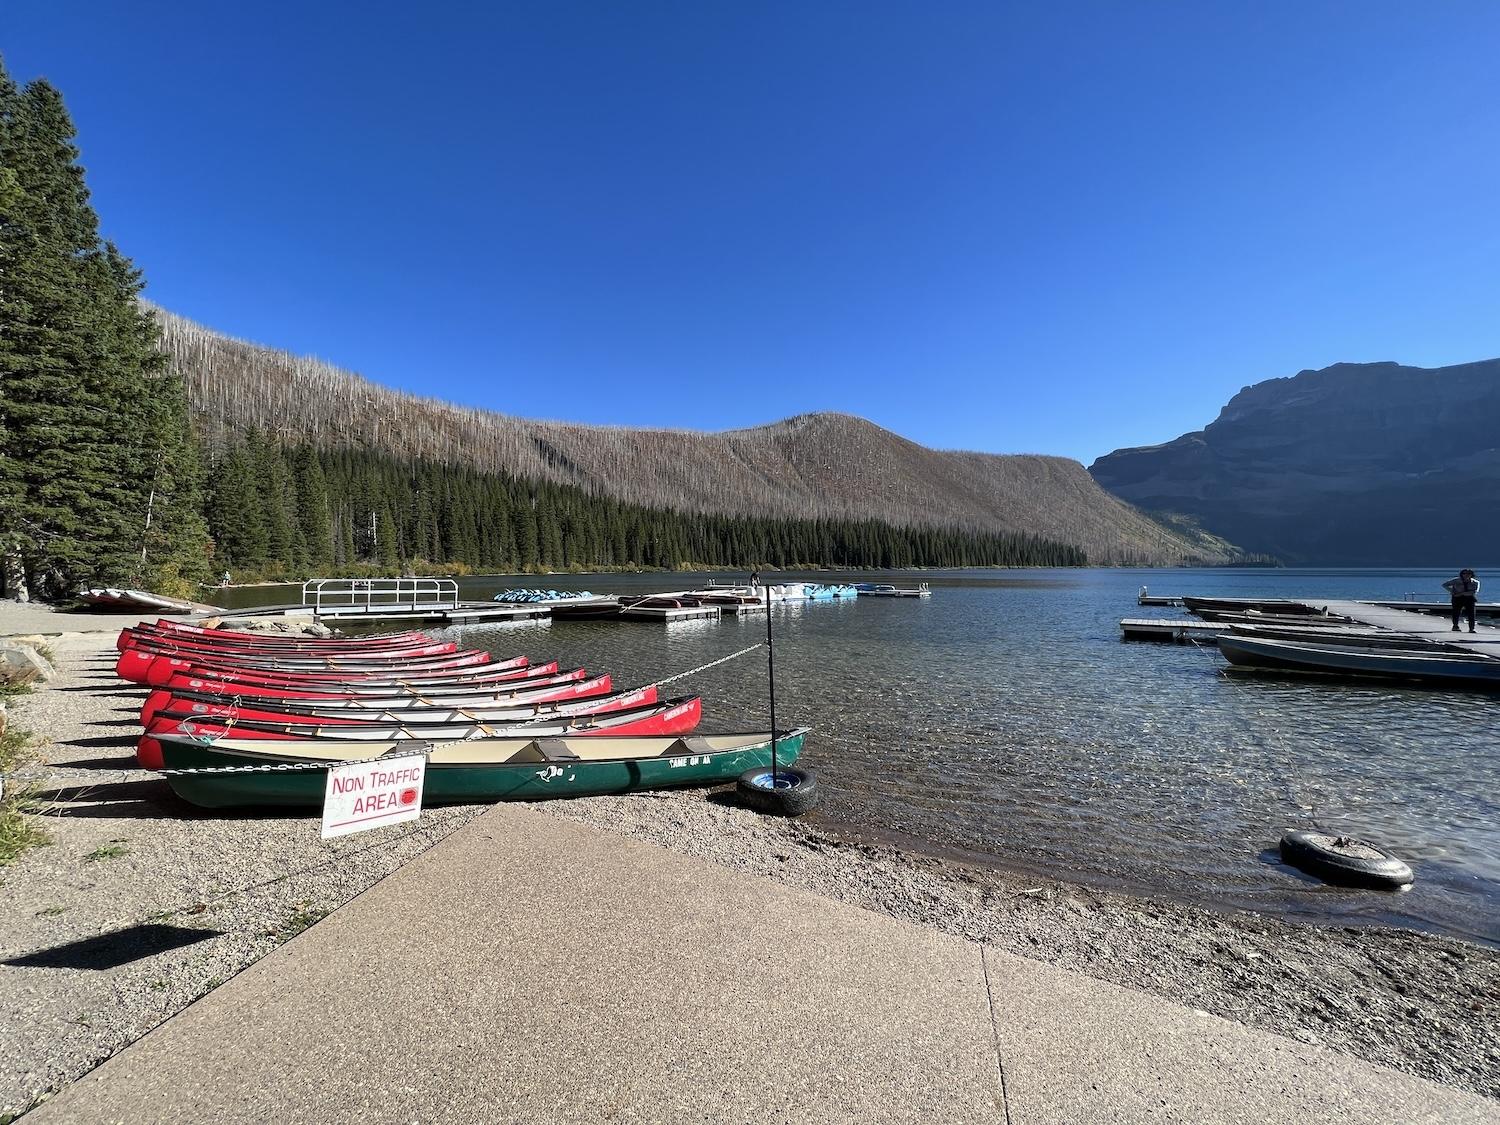 Rental businesses operating in Waterton Lake National Park — like Cameron Lake Boat Rentals — can take an aquatic invasive species course to be exempt from new restrictions.